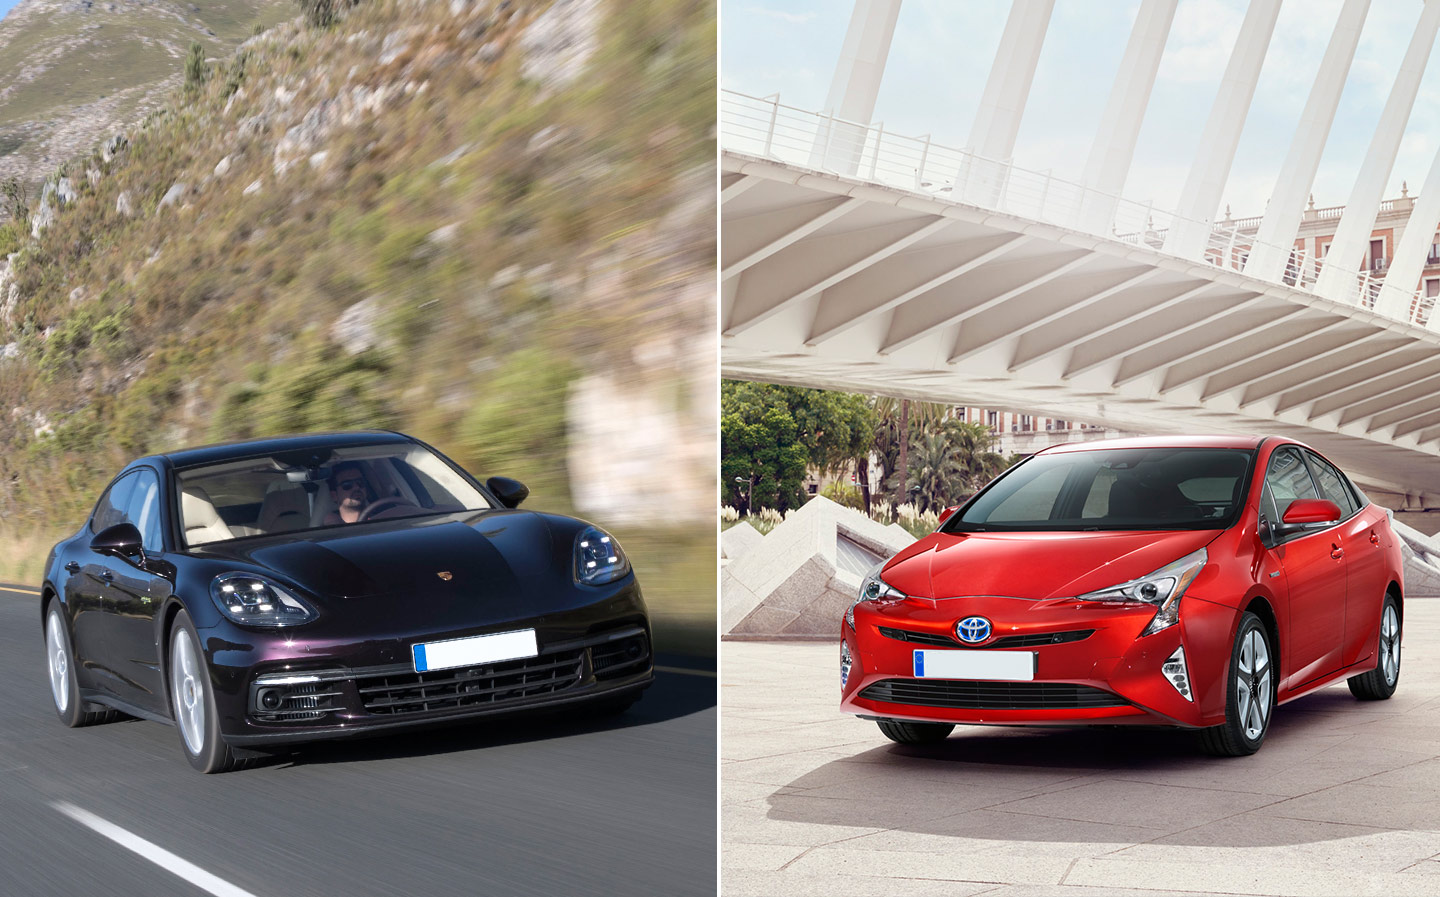 This is why a Porsche driver can pay the same road tax as a Prius driver